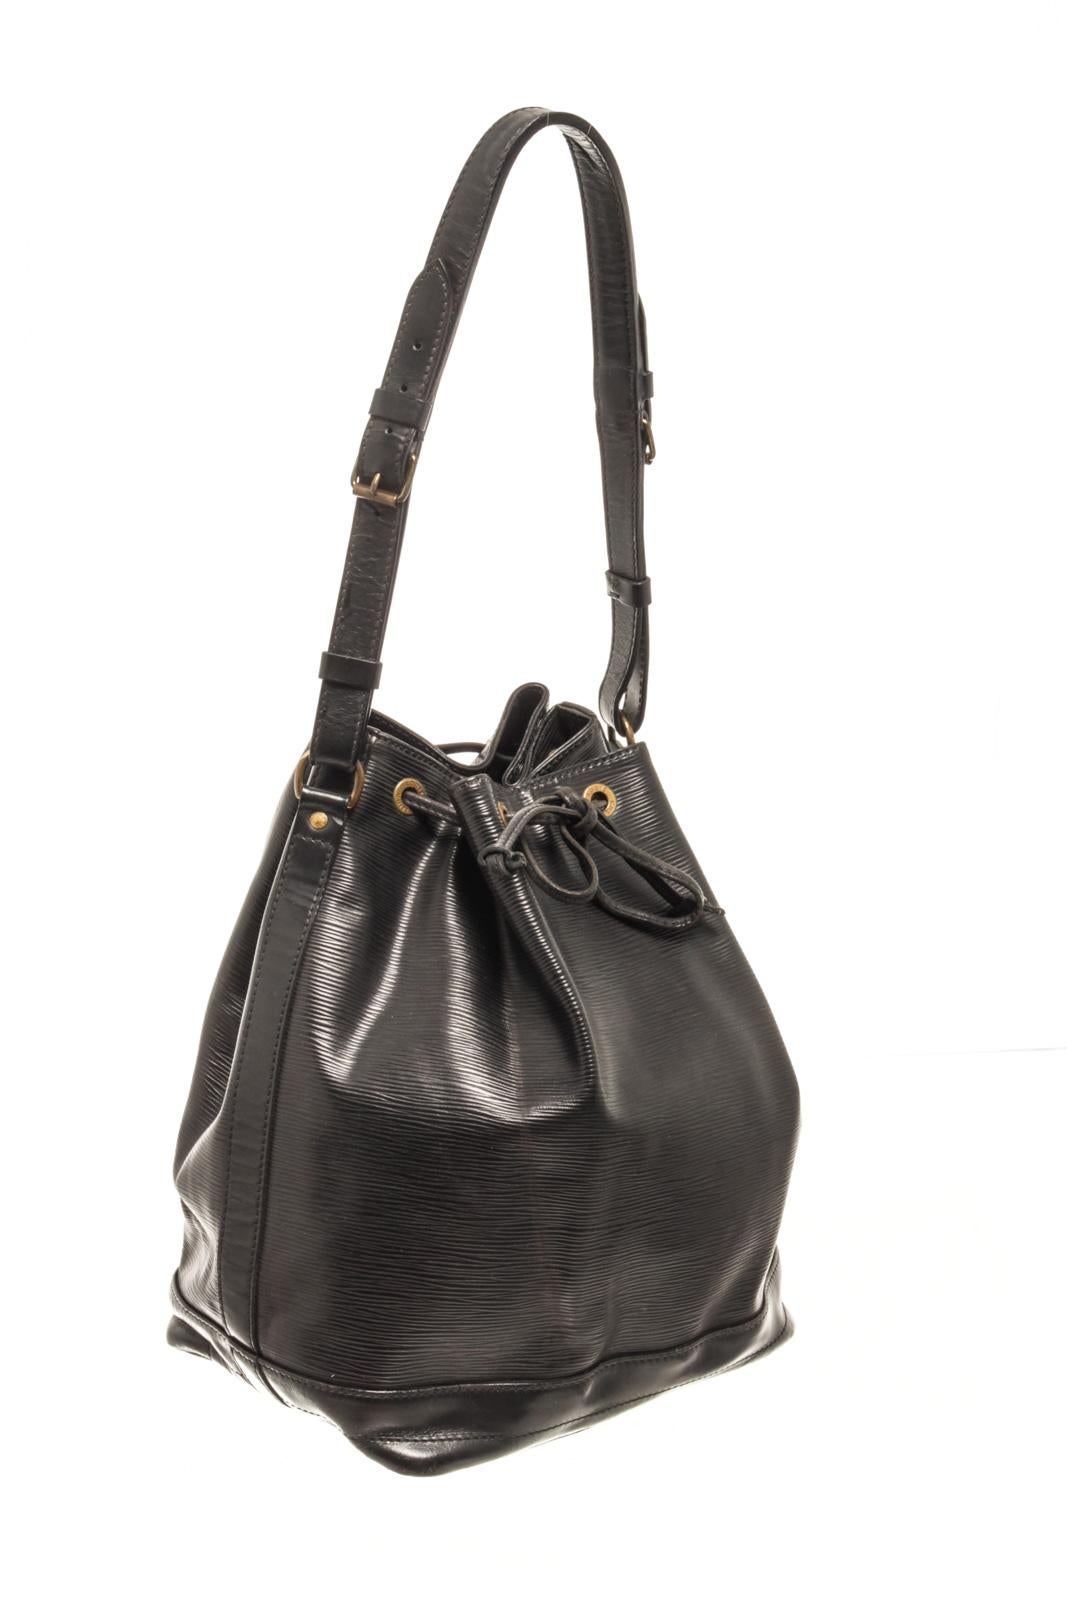 Louis Vuitton Black Epi Leather Noe GM Bucket Bag with the petit noe features an epi leather body, an adjustable shoulder strap, a drawstring closure, alcantara lining, and an interior zip pocket.

87325MSC